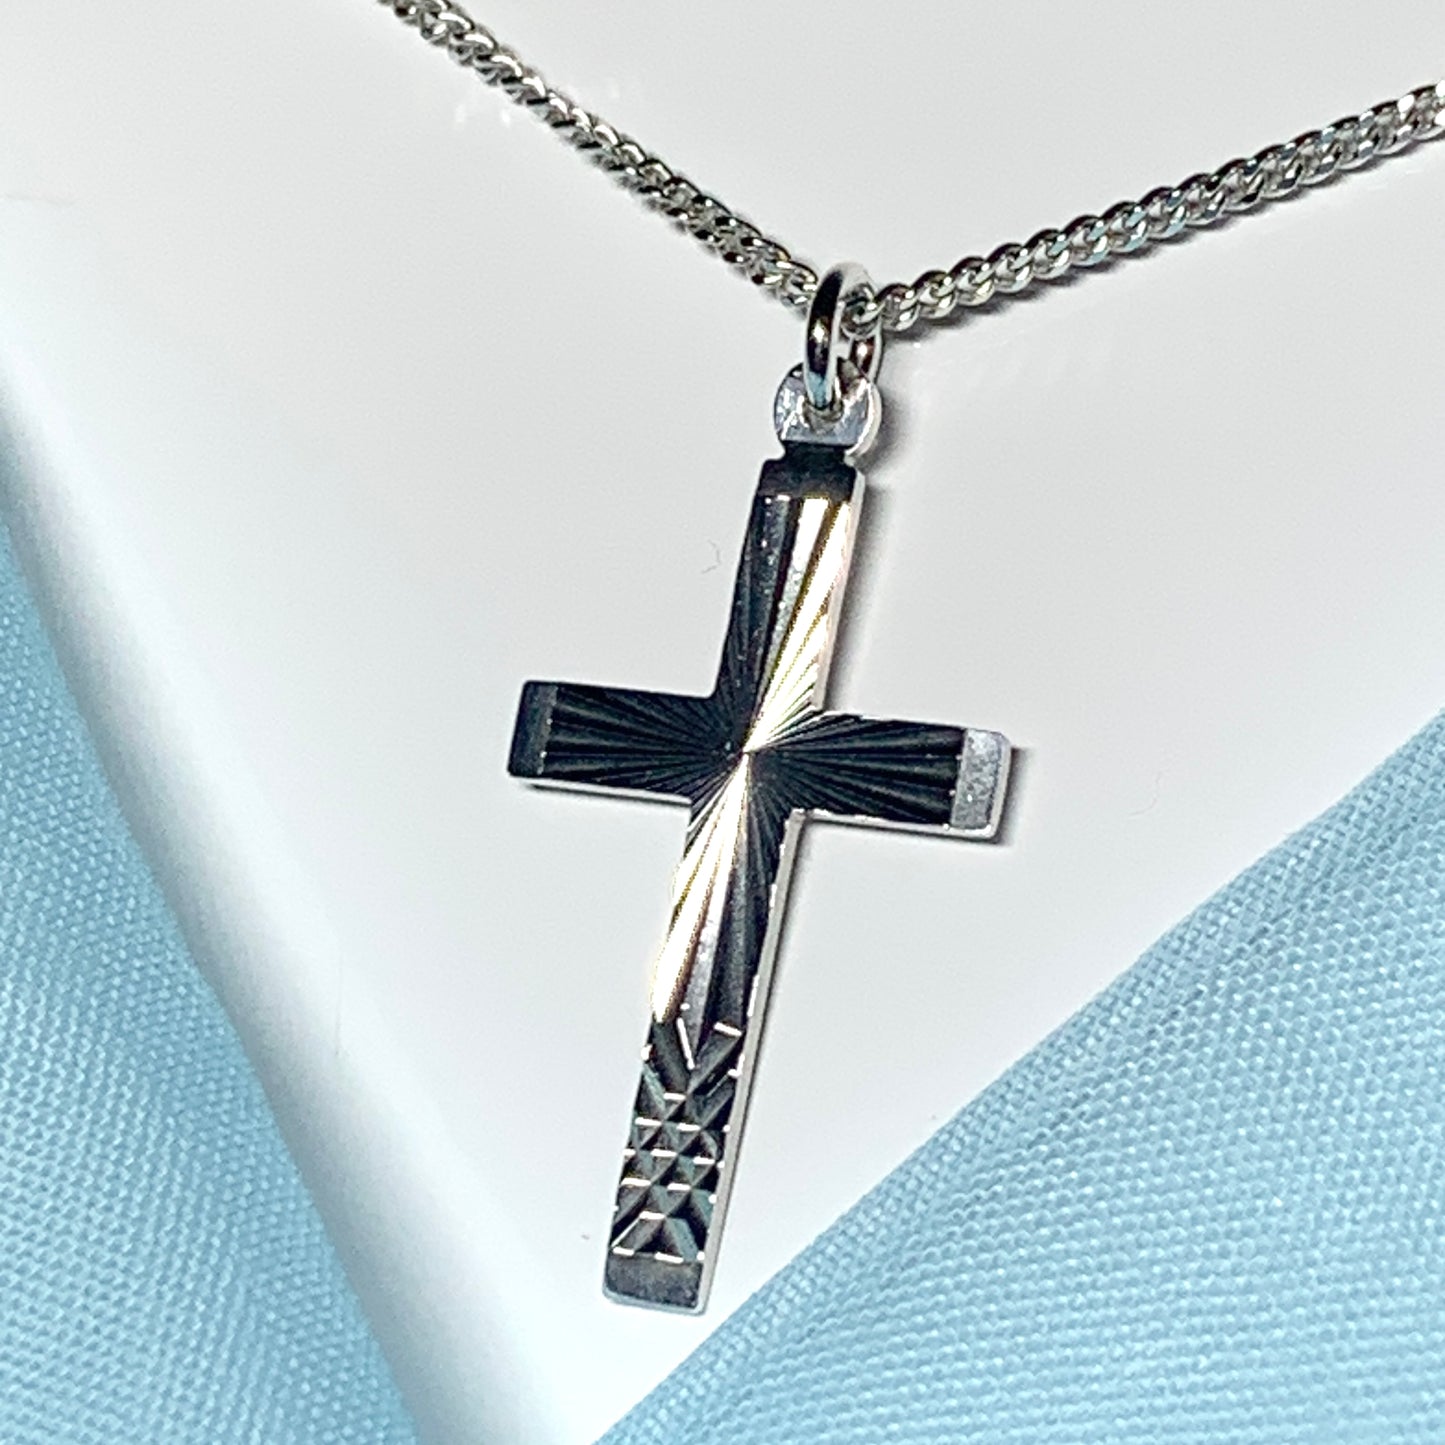 Solid cross patterned sterling silver diamond cut including chain